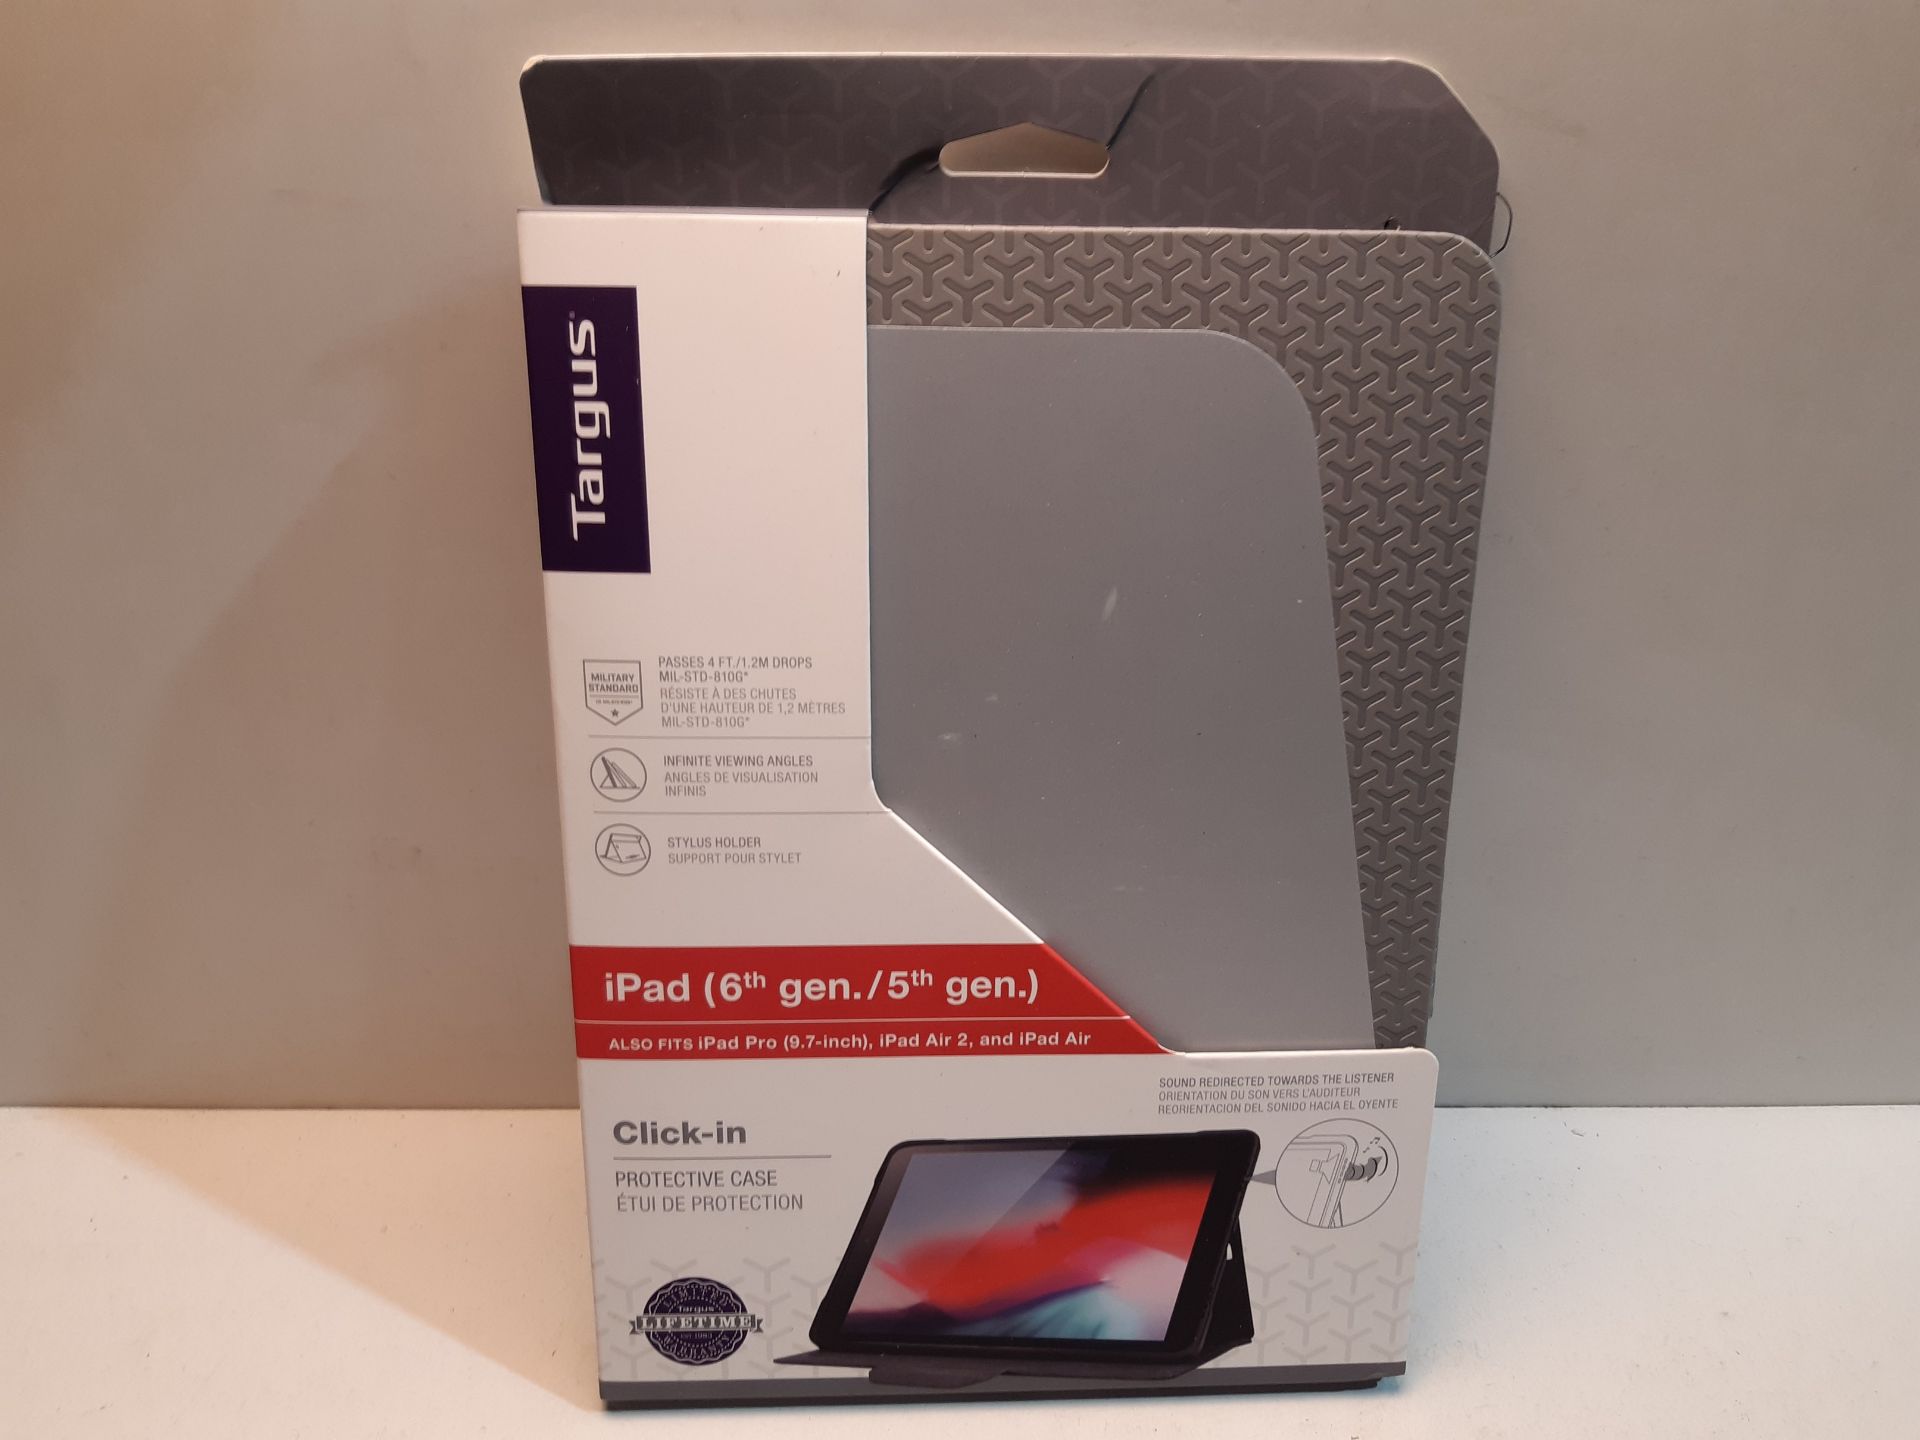 RRP £14.84 Targus Click-In Case for iPad (6th/ 5th gen.) - Image 2 of 2